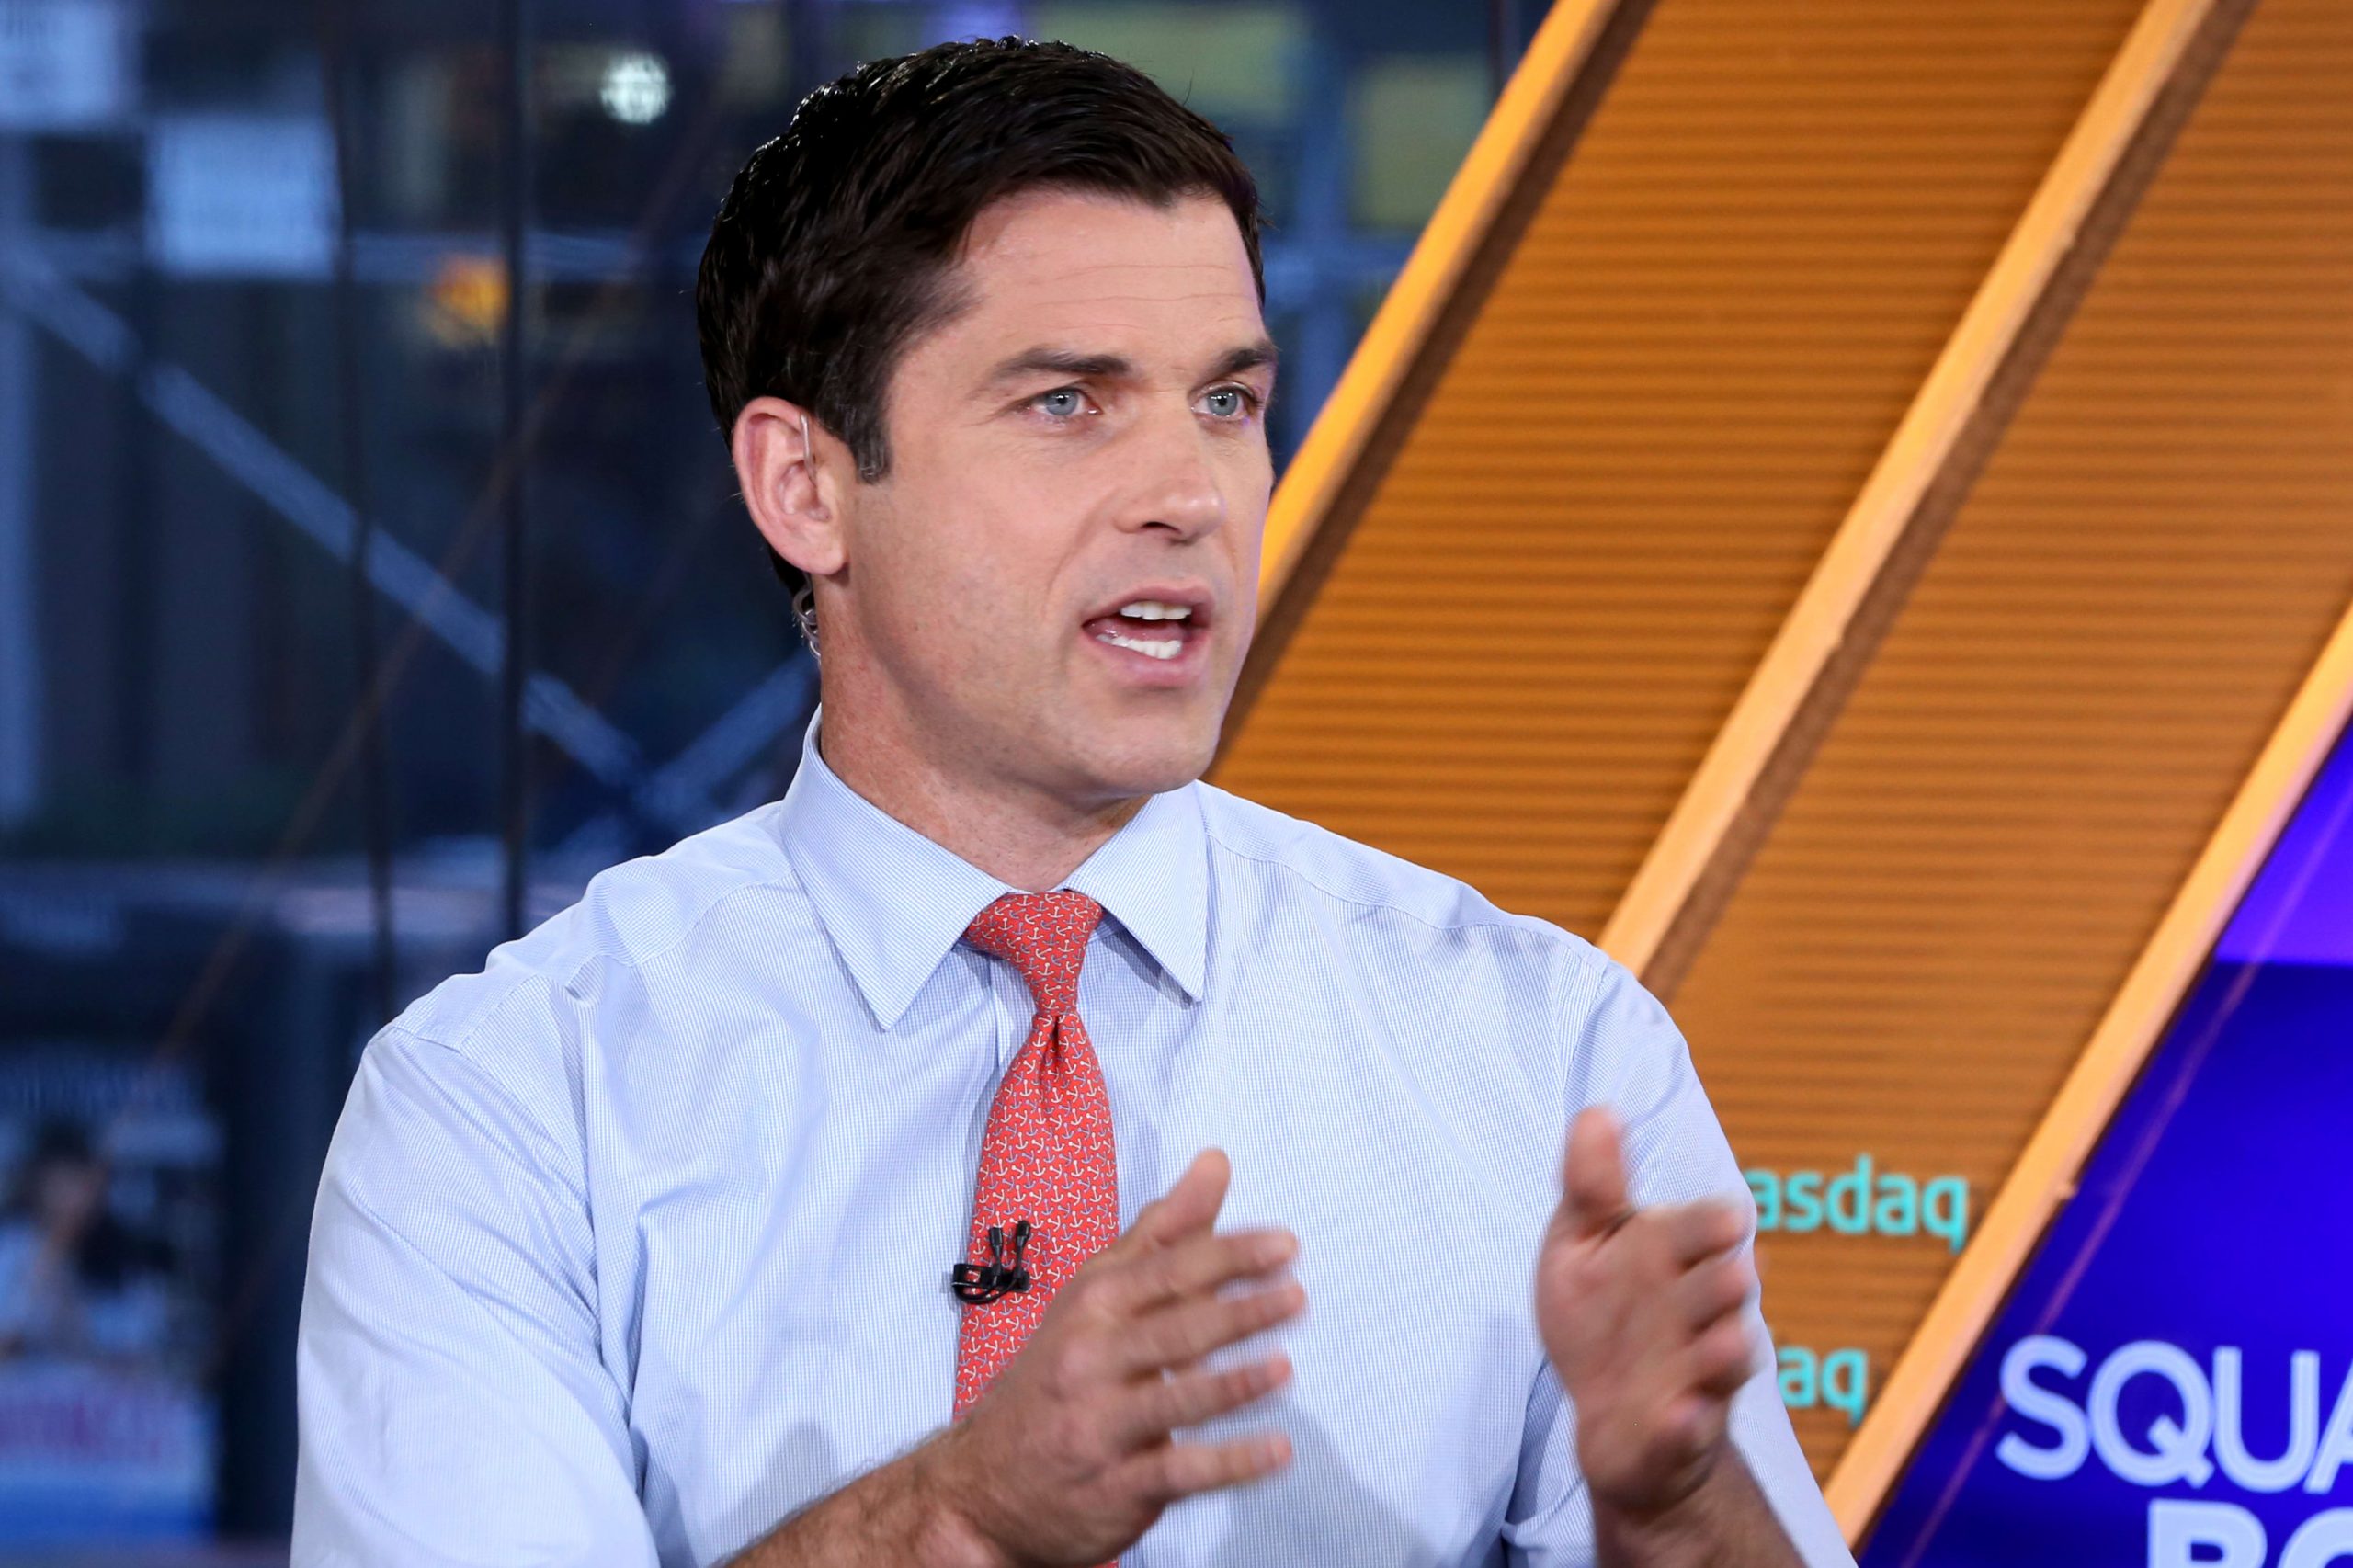 Tom Farley, dealmaker and ex-NYSE president, shares his Covid ordeal